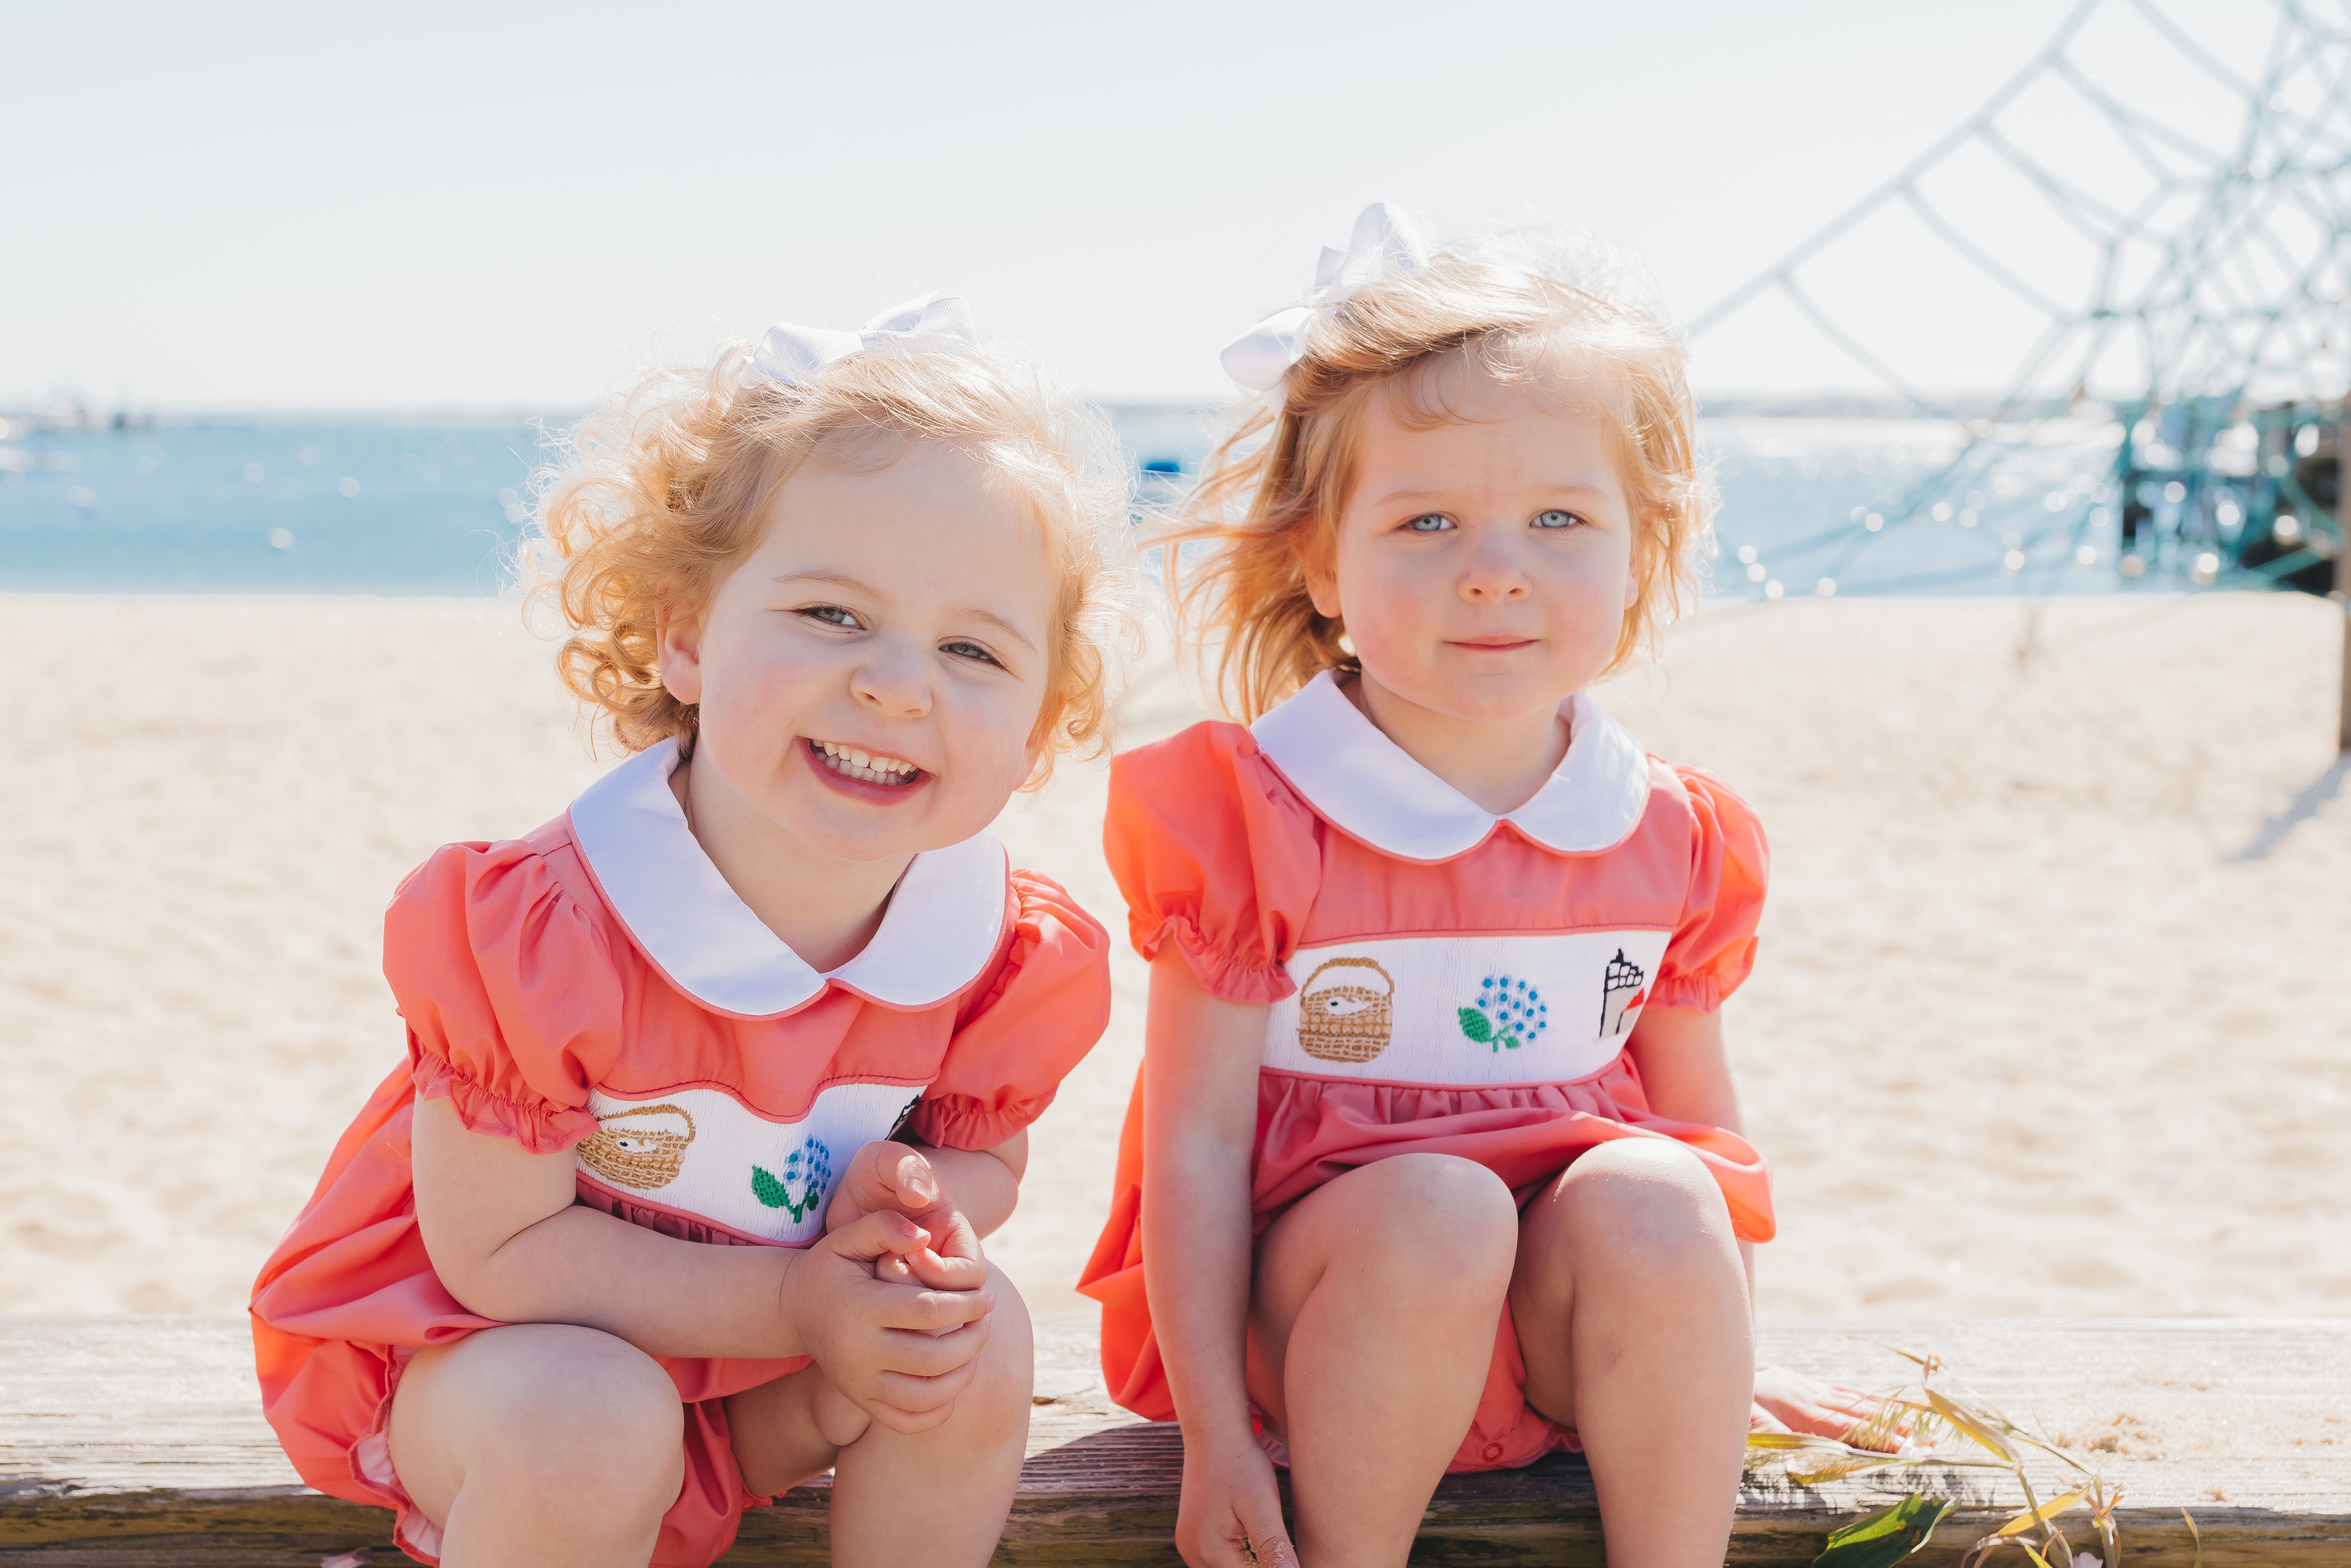 Nantucket Collection: Peachtree Kids and Ann + Reeves Kids